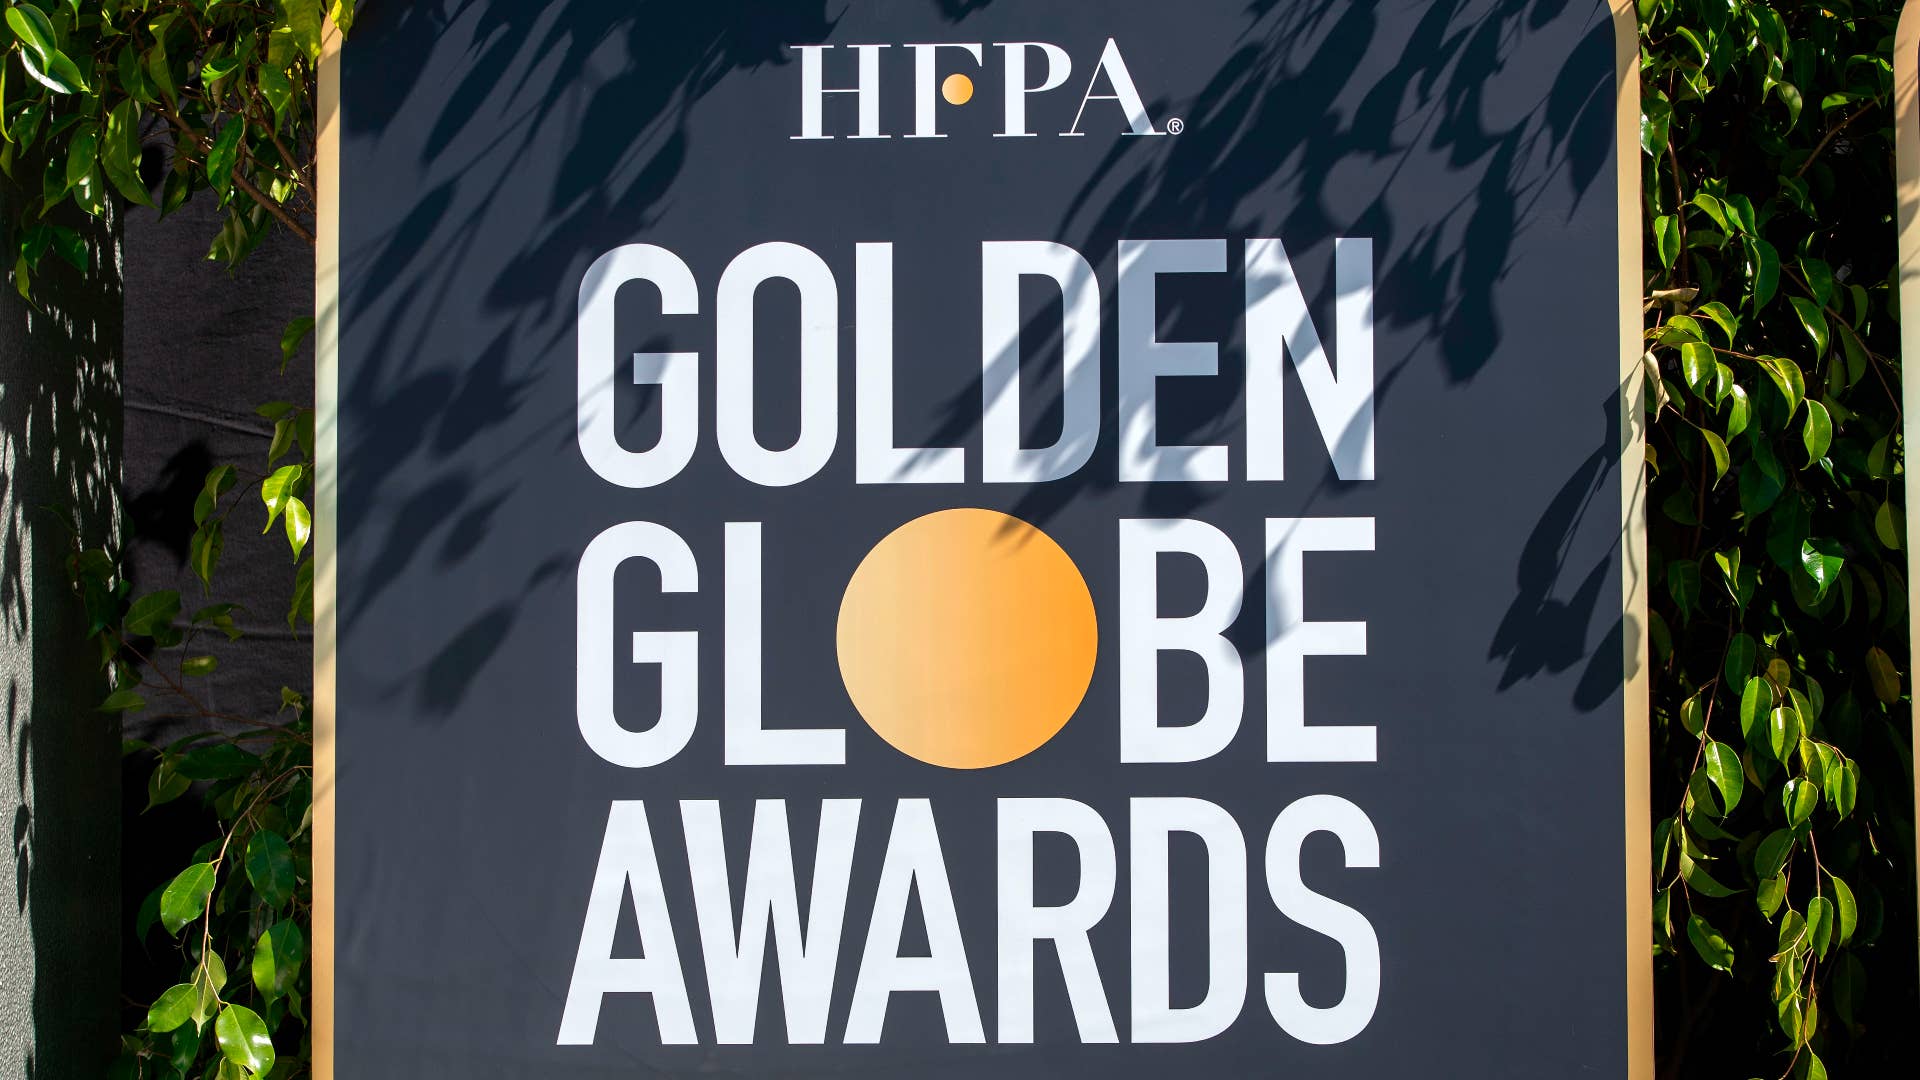 View of the HFPA Golden Globe Awards logo.